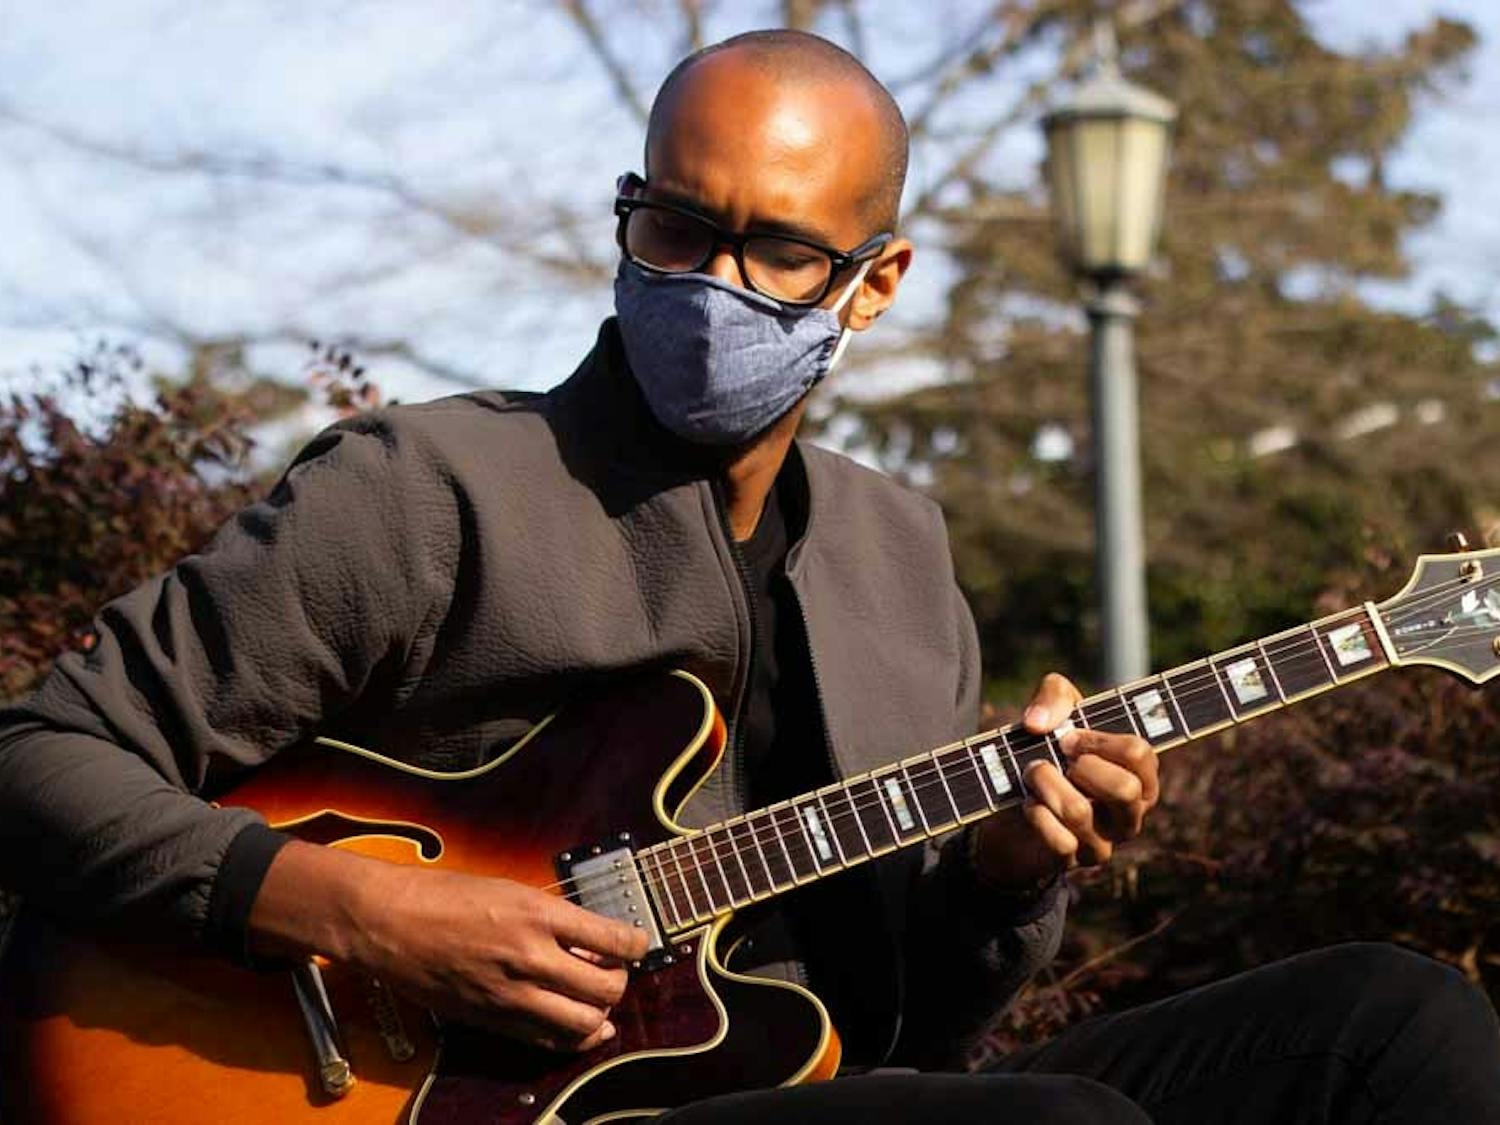 Musician Keenan Jenkins, or XOXOK, plays guitar at the Old Well on Friday, March 5th, 2021.